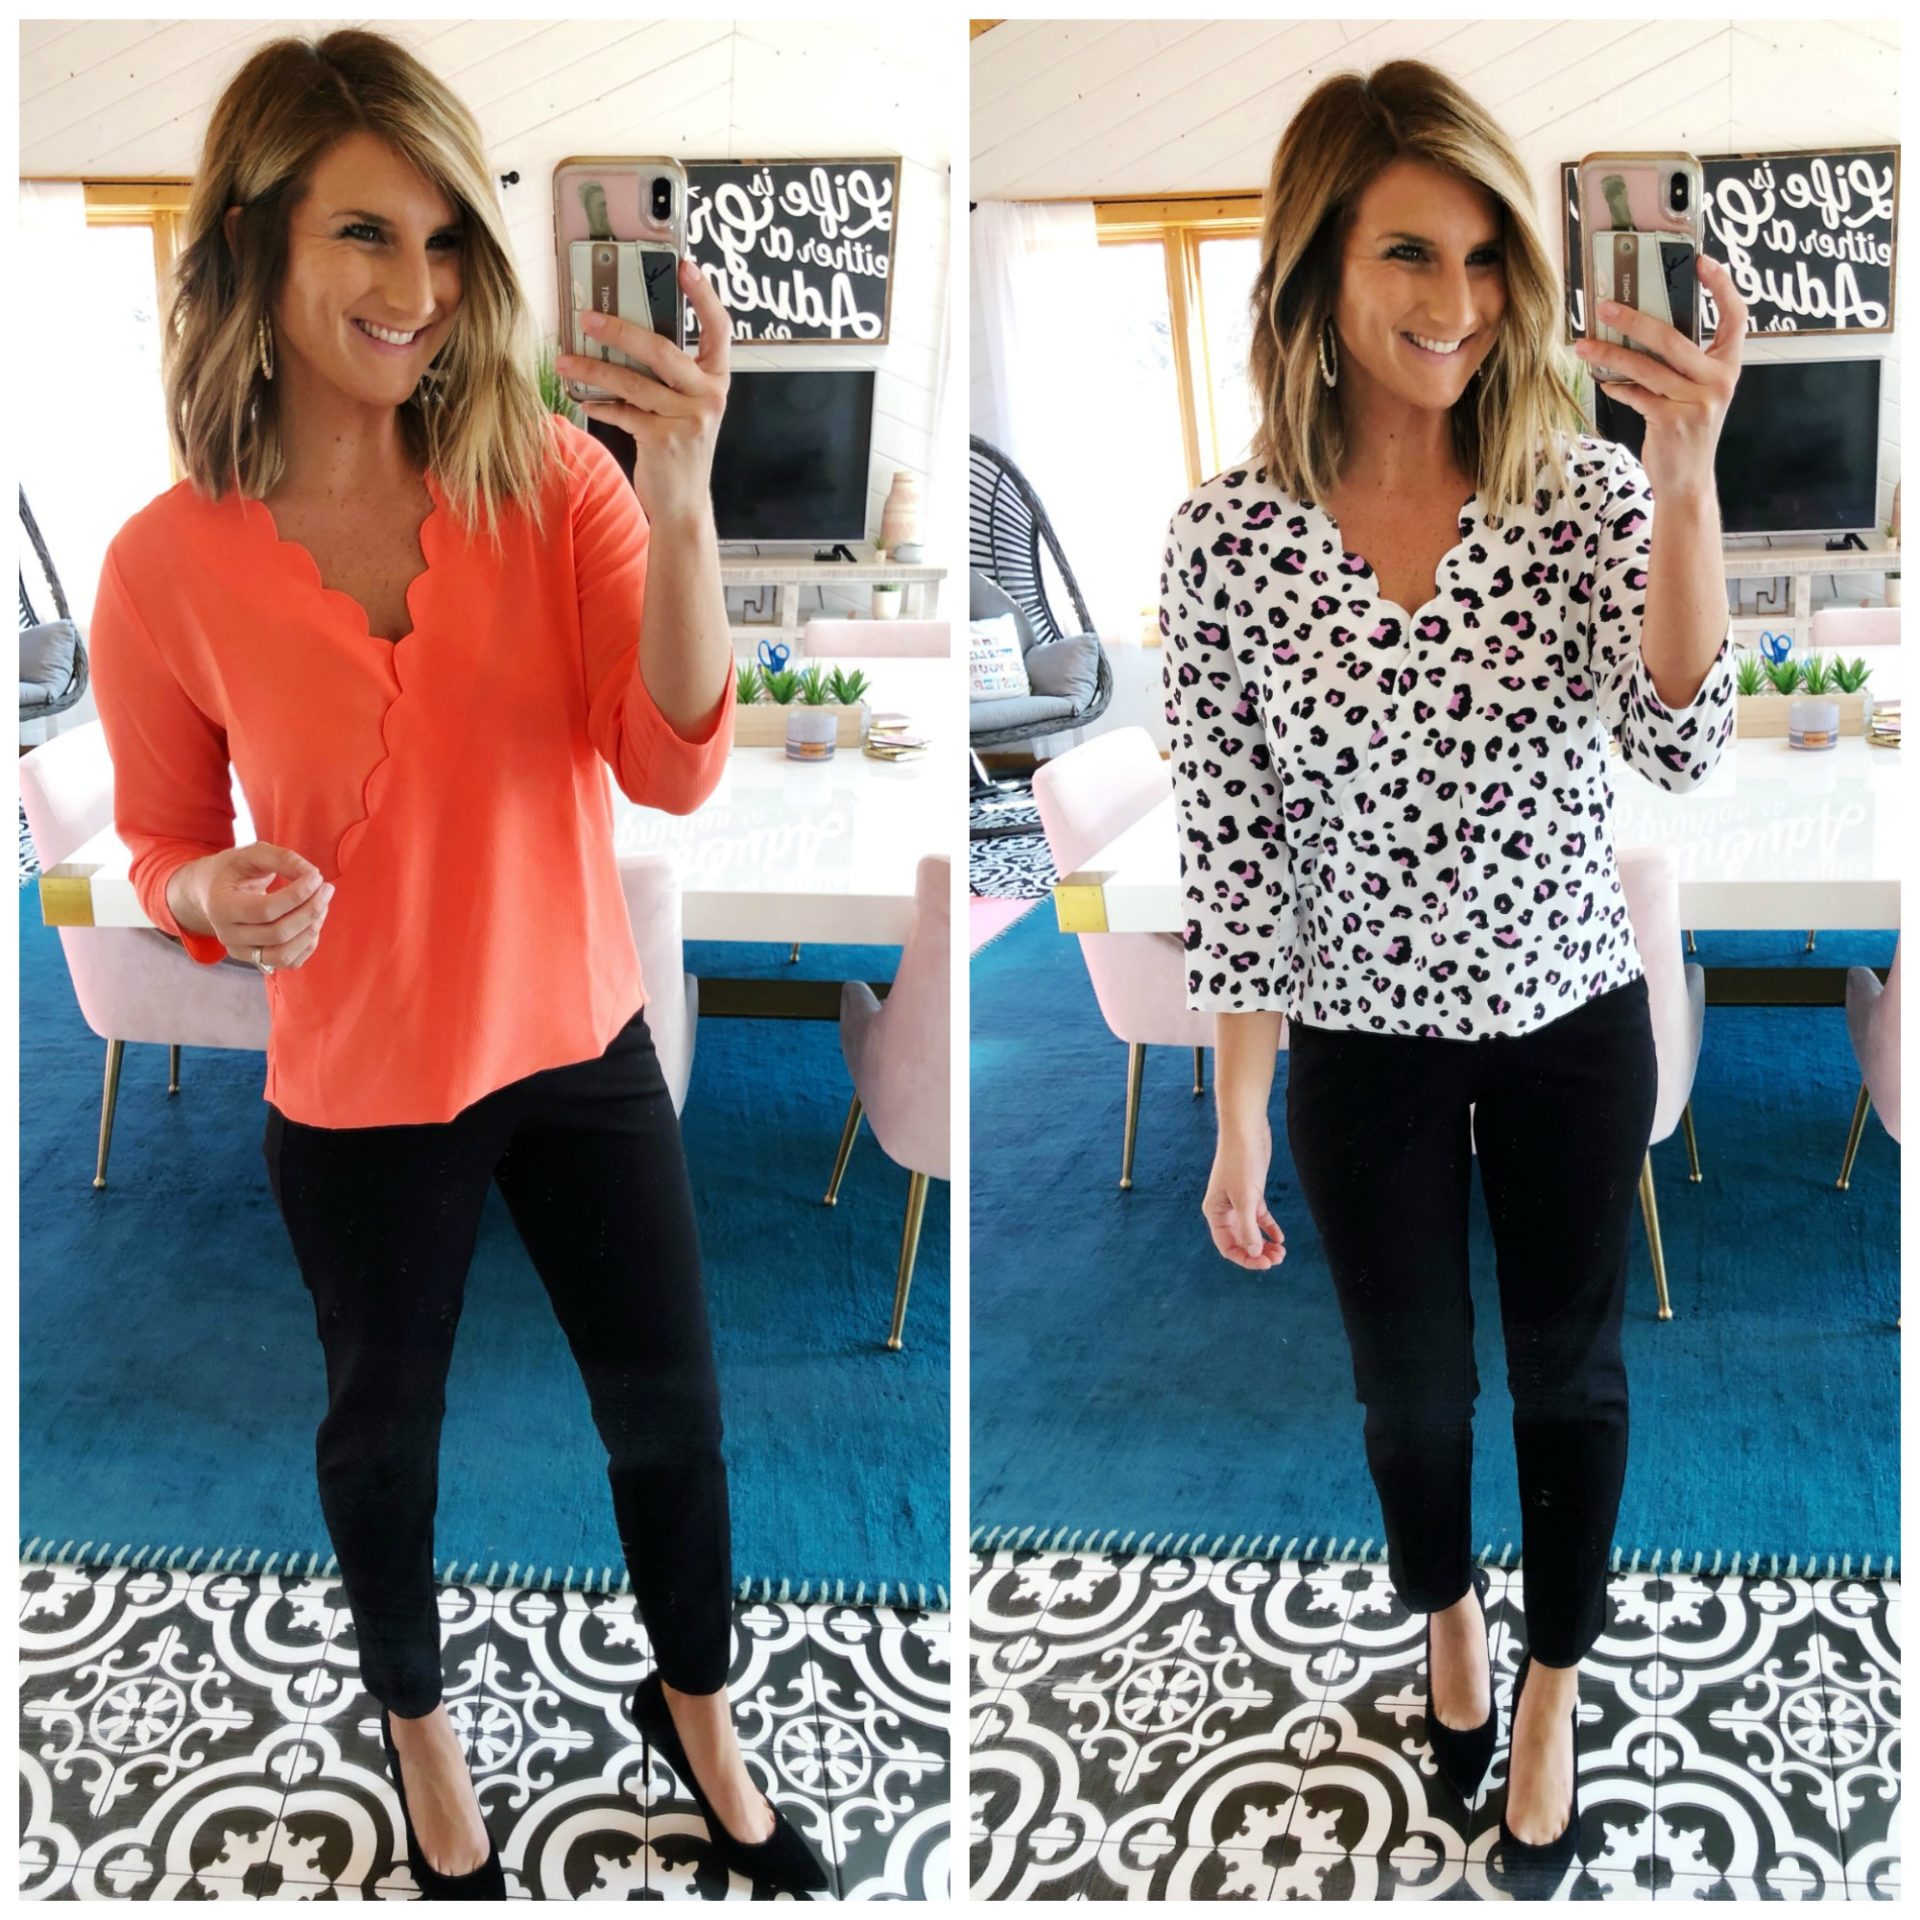 Scalloped Top for Work // Spring Work Outfit // Nursing Friendly Top for Work